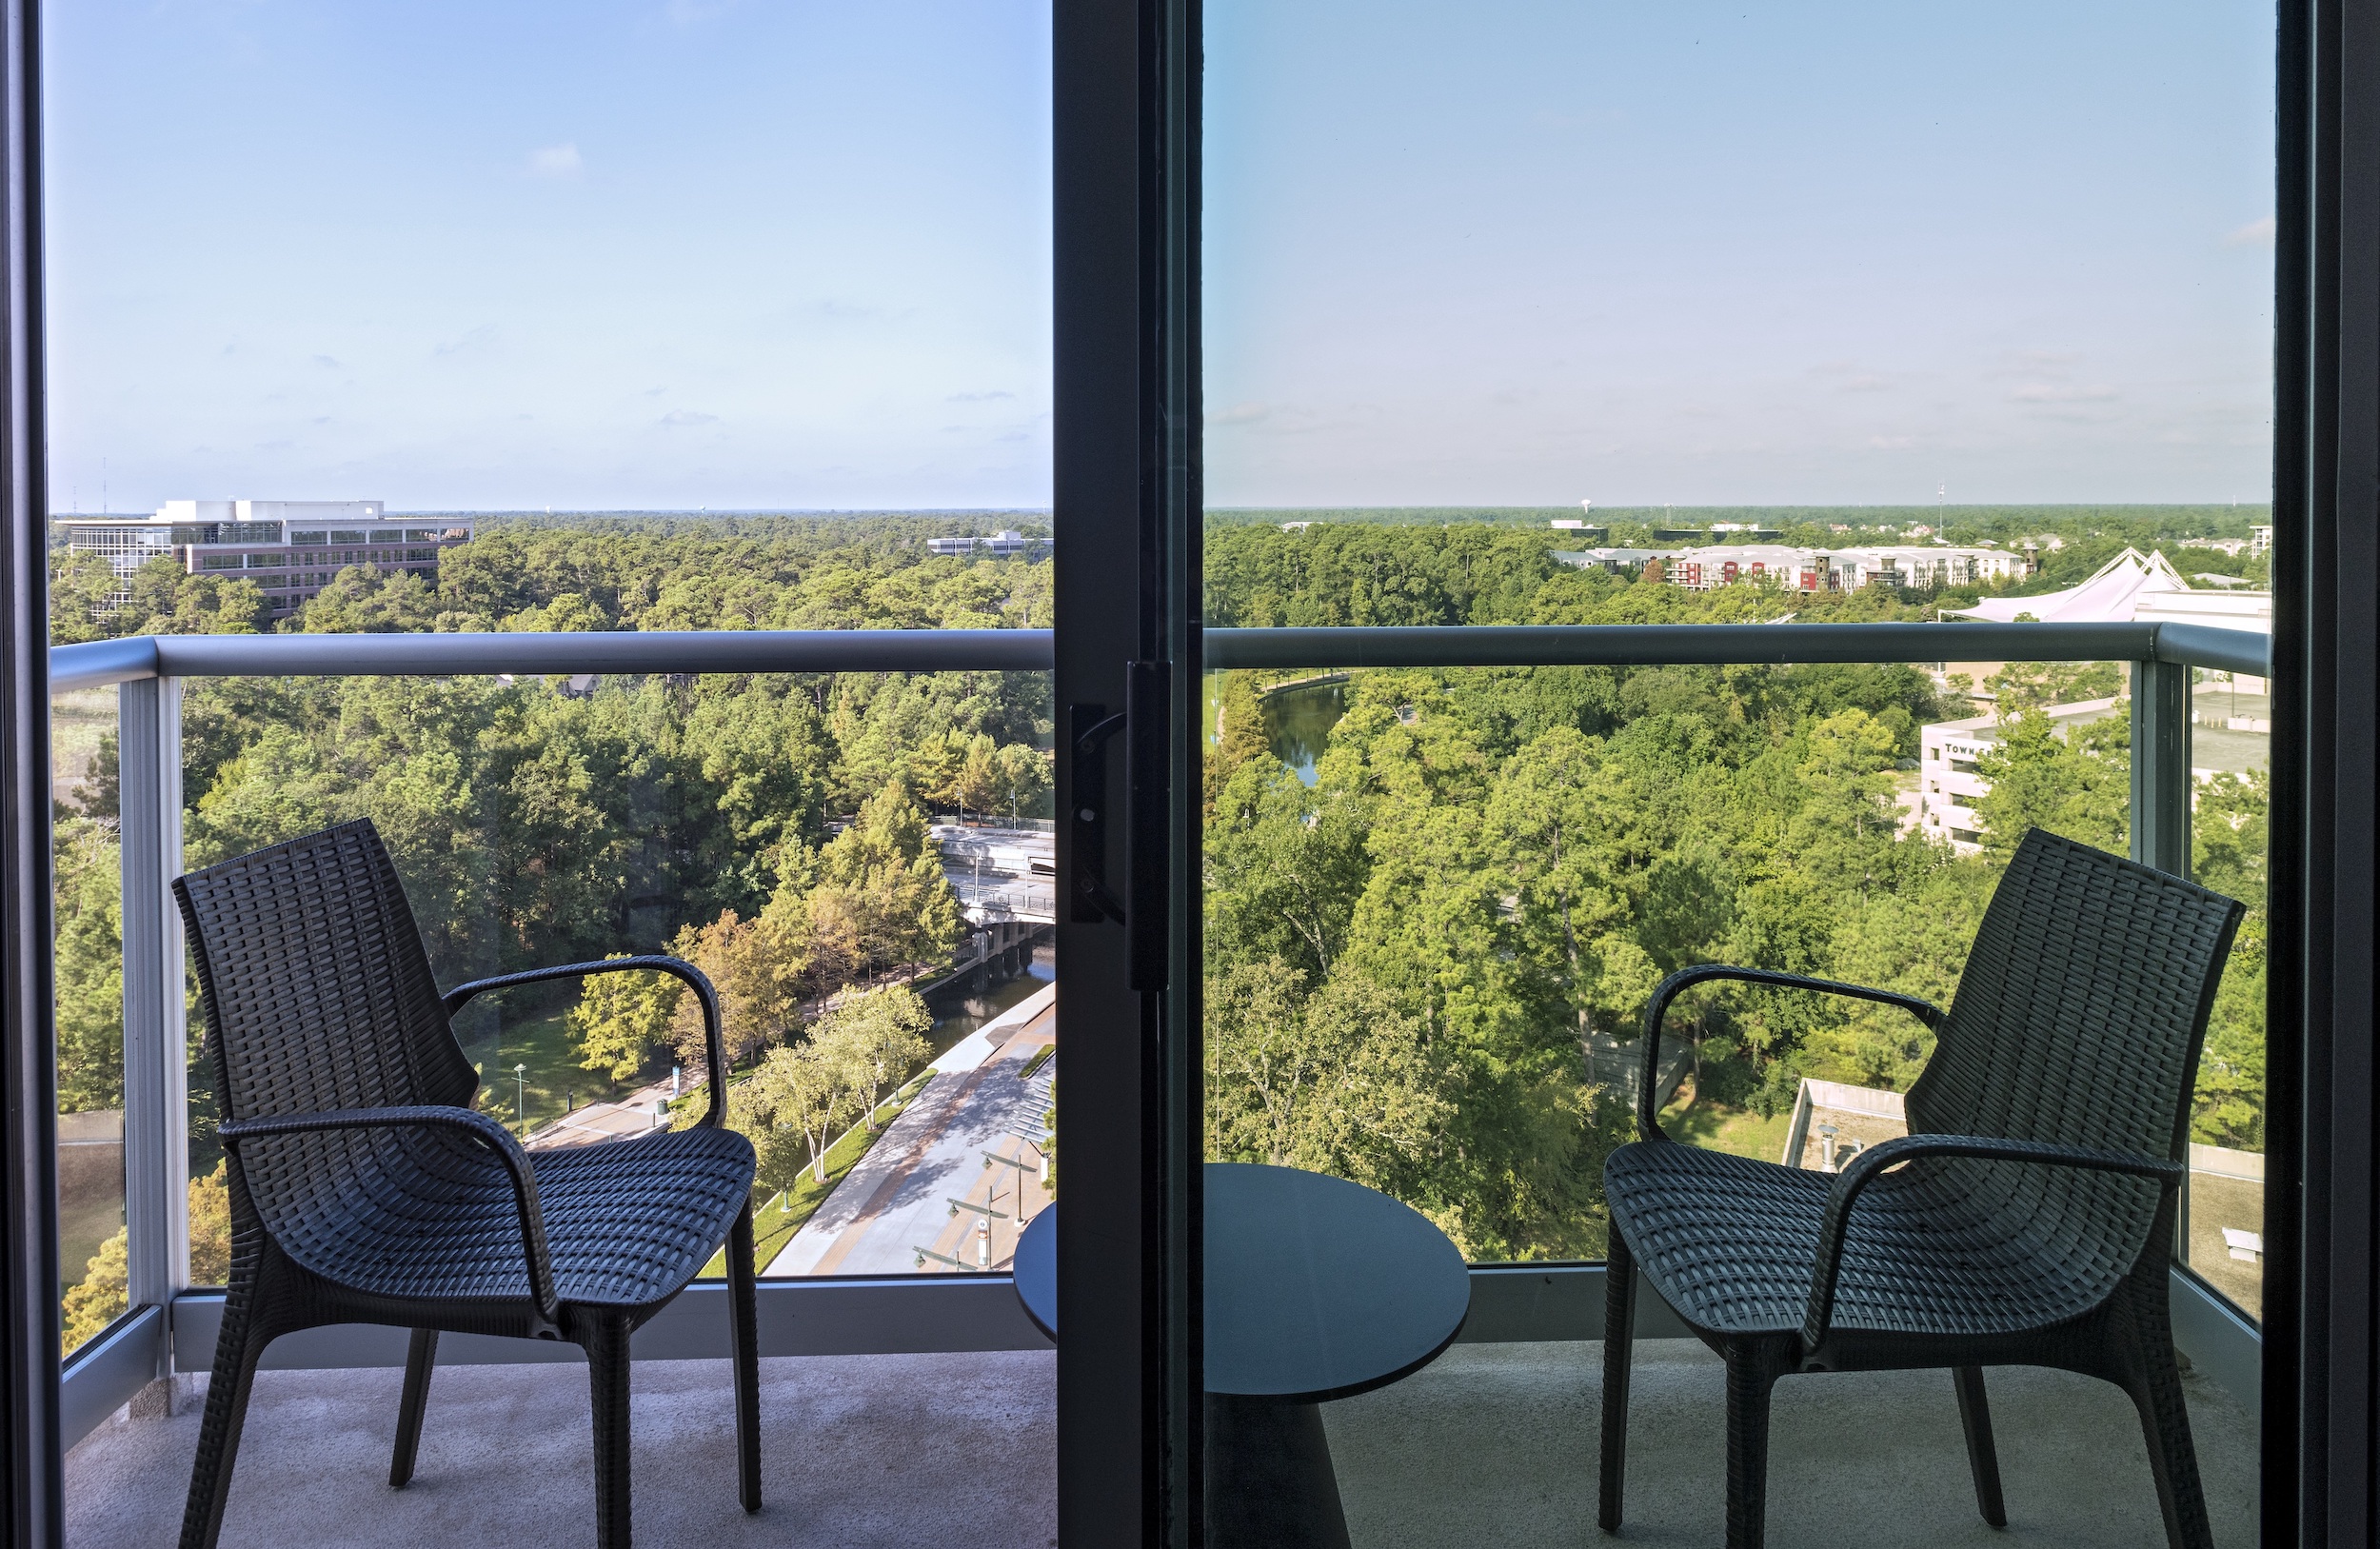 A king balcony view that is waterfront and overlooks The Cynthia Woods Mitchell Pavilion.